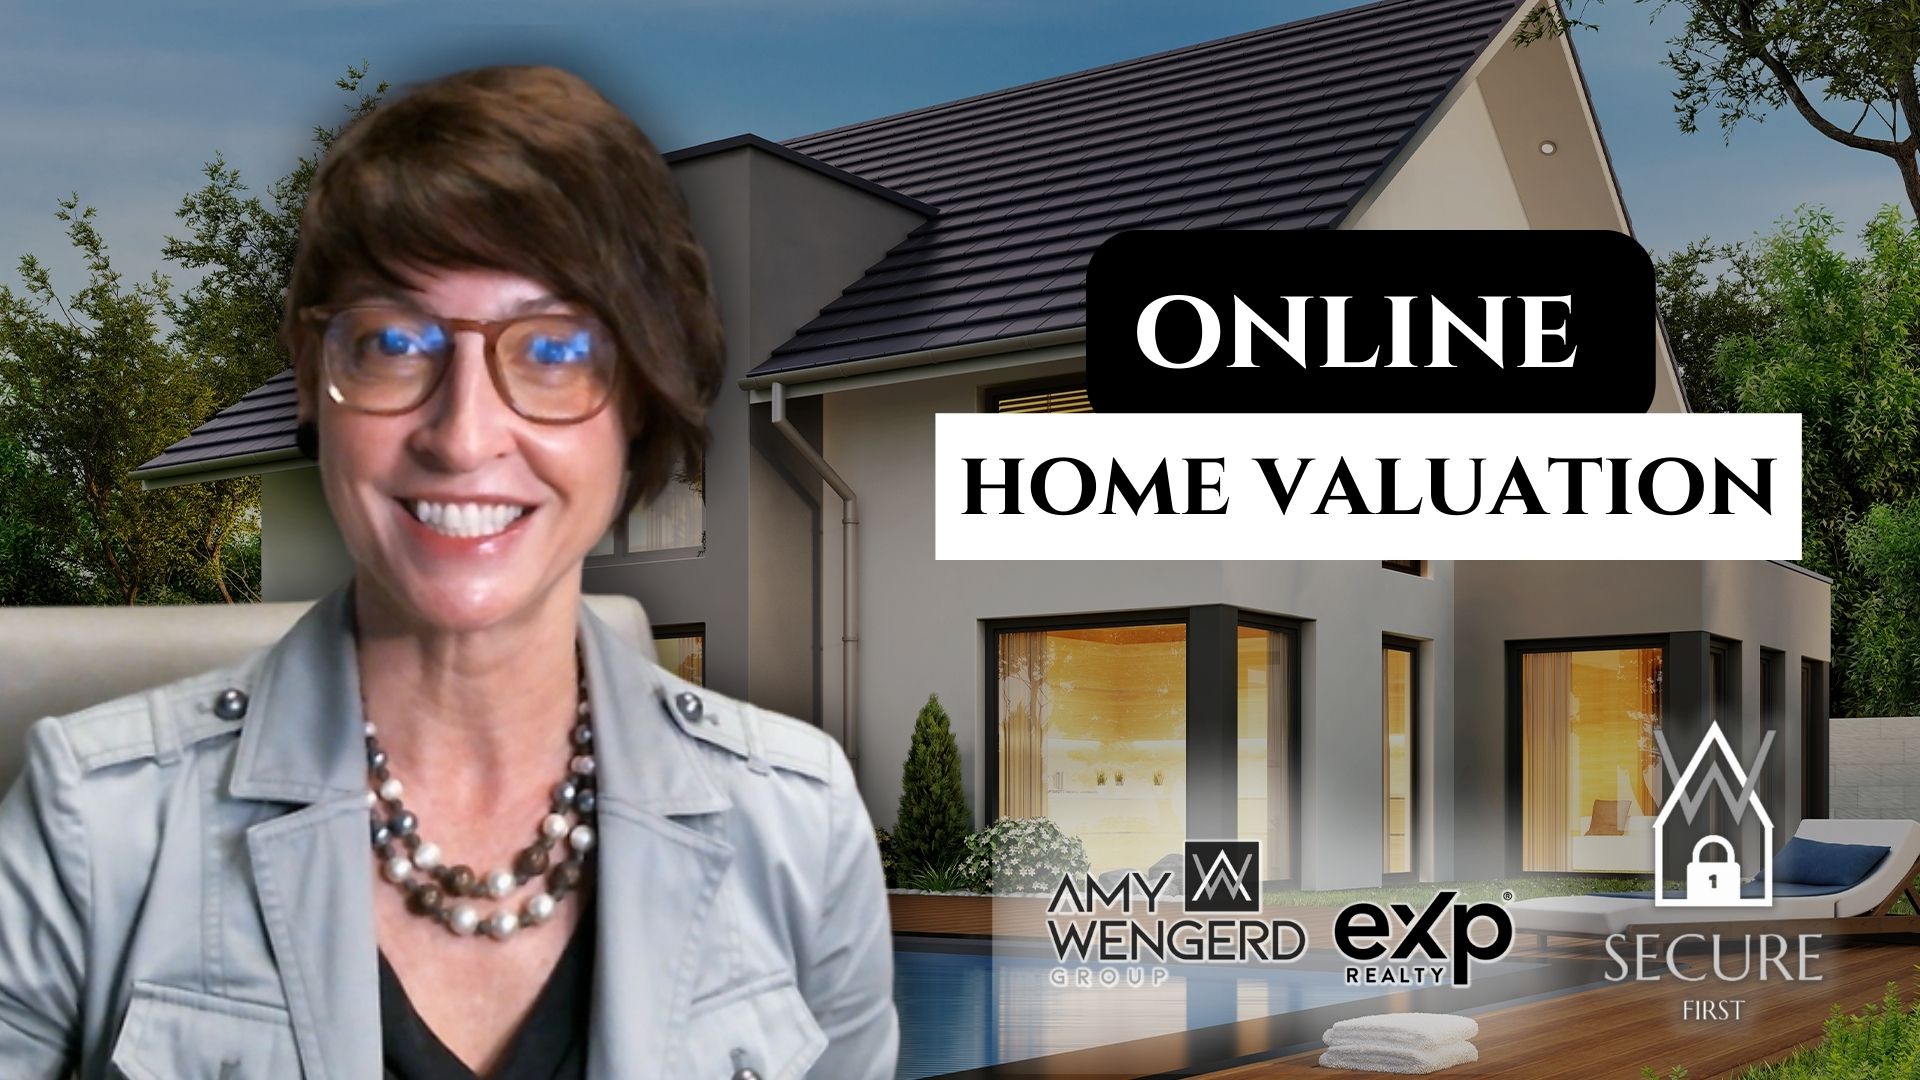 Find Out the True Value of Your Home